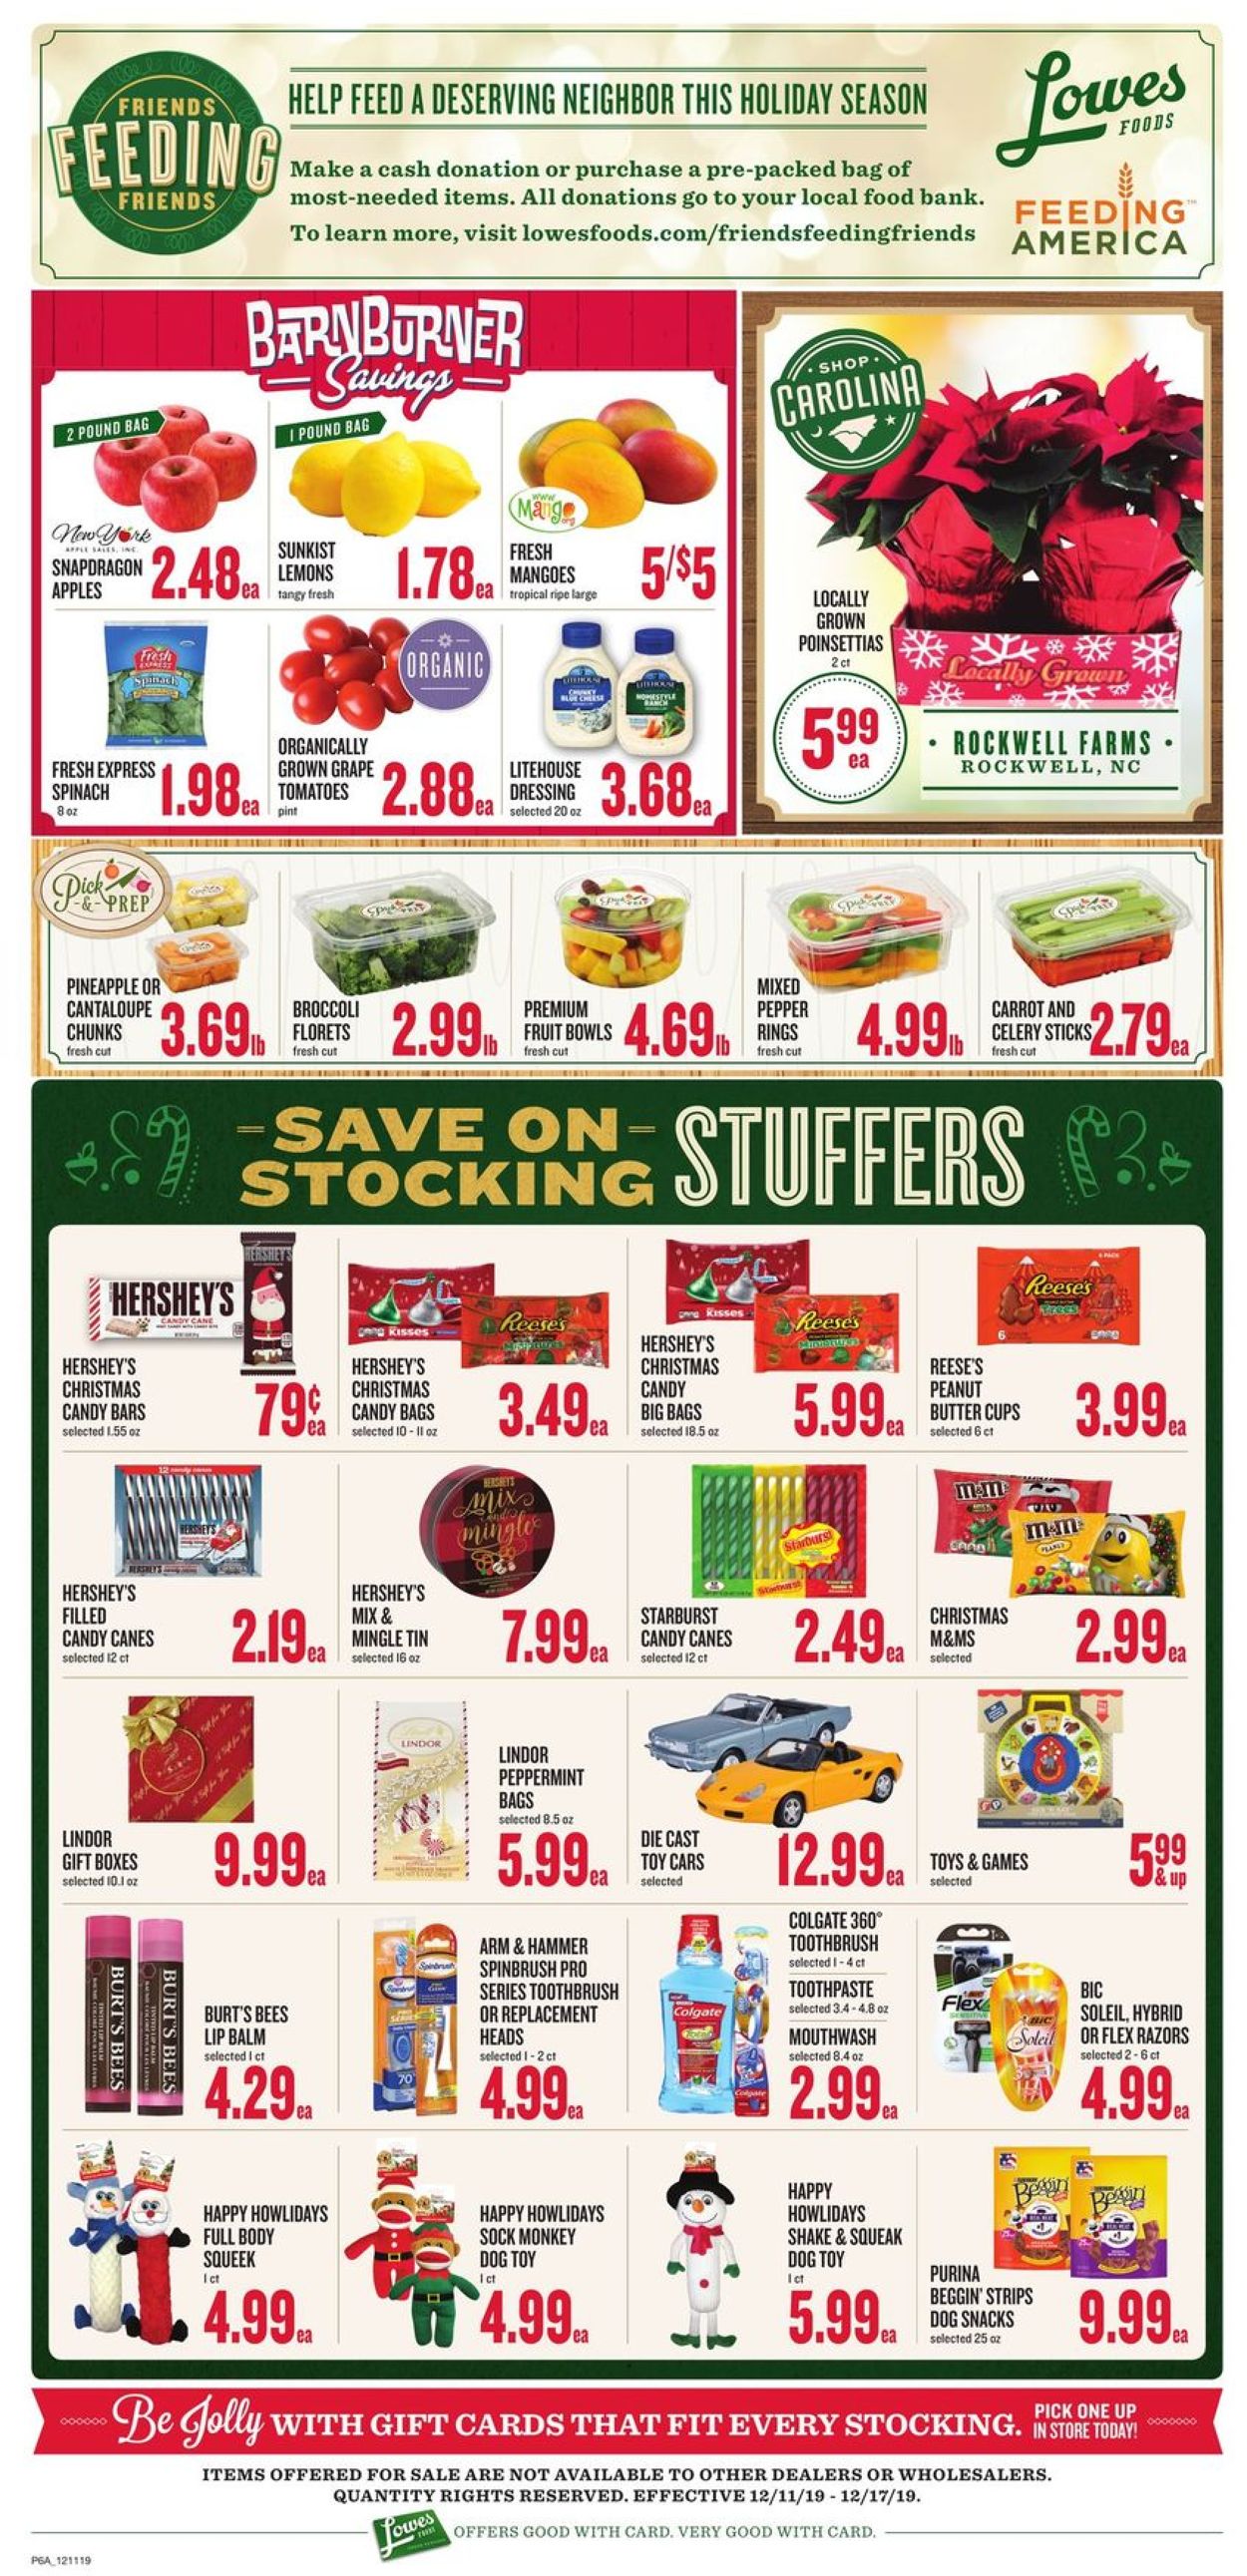 Lowes Foods - Holiday Ad 2019 Weekly Ad Circular - valid 12/11-12/17/2019 (Page 12)